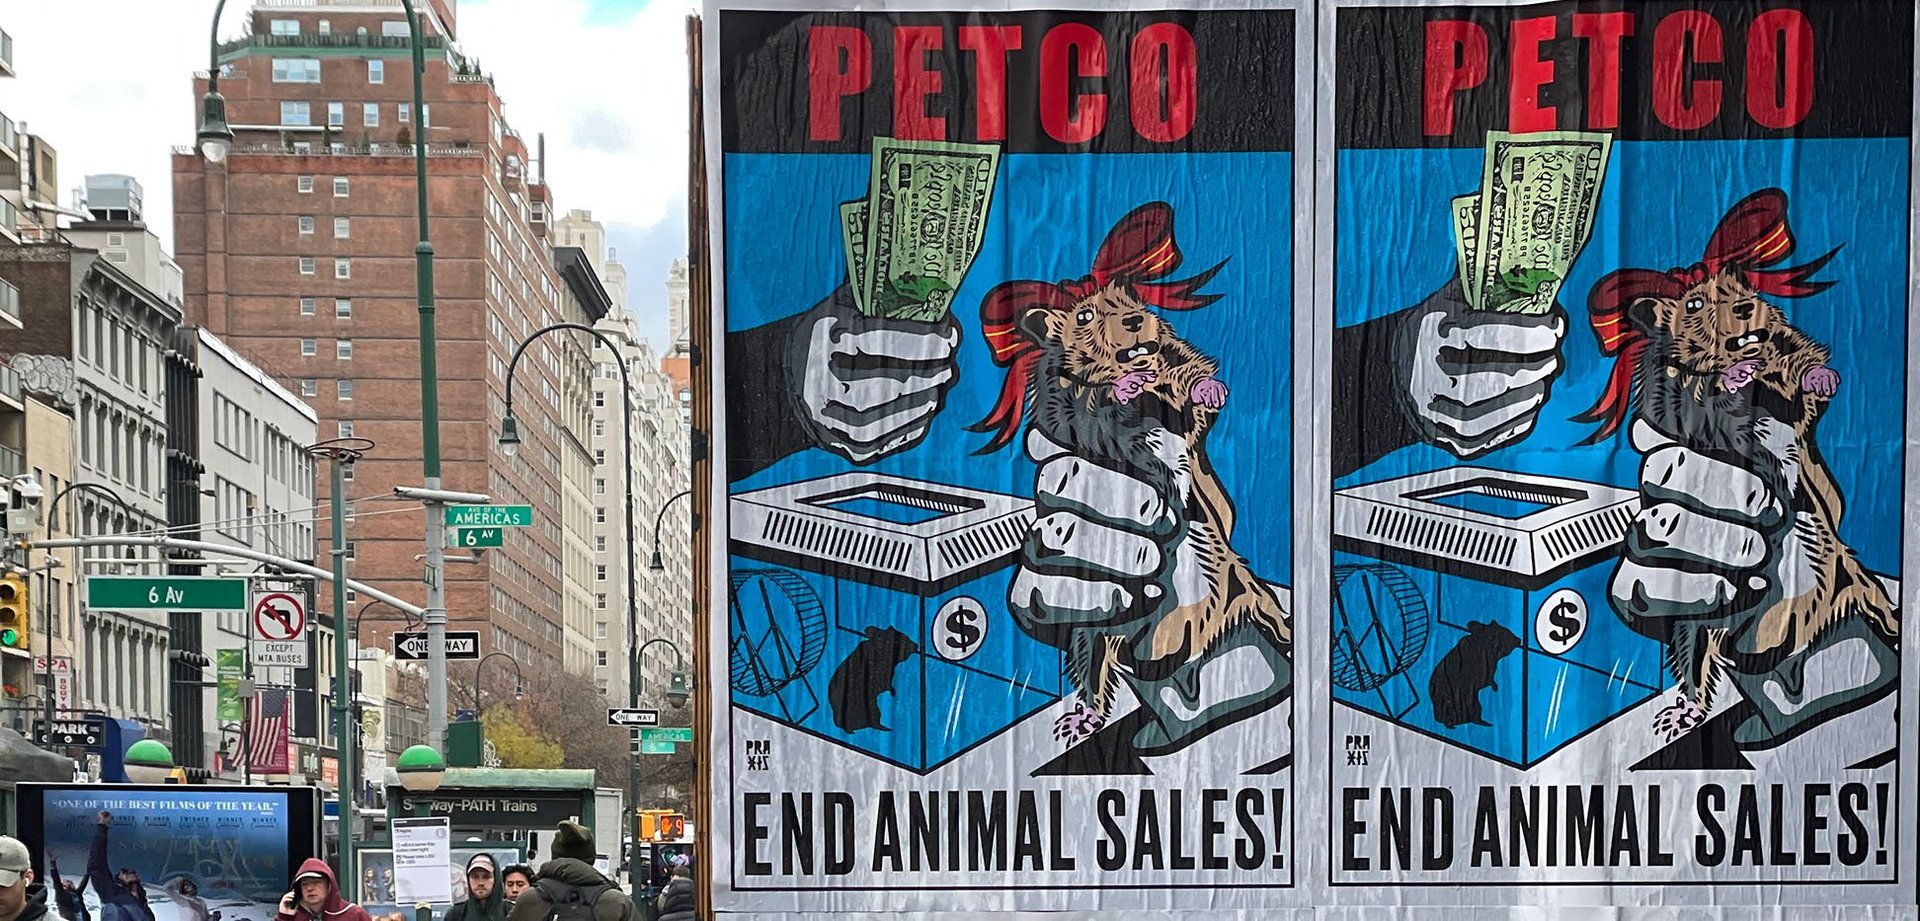 Posters that say "Petco End Animal Sales!"